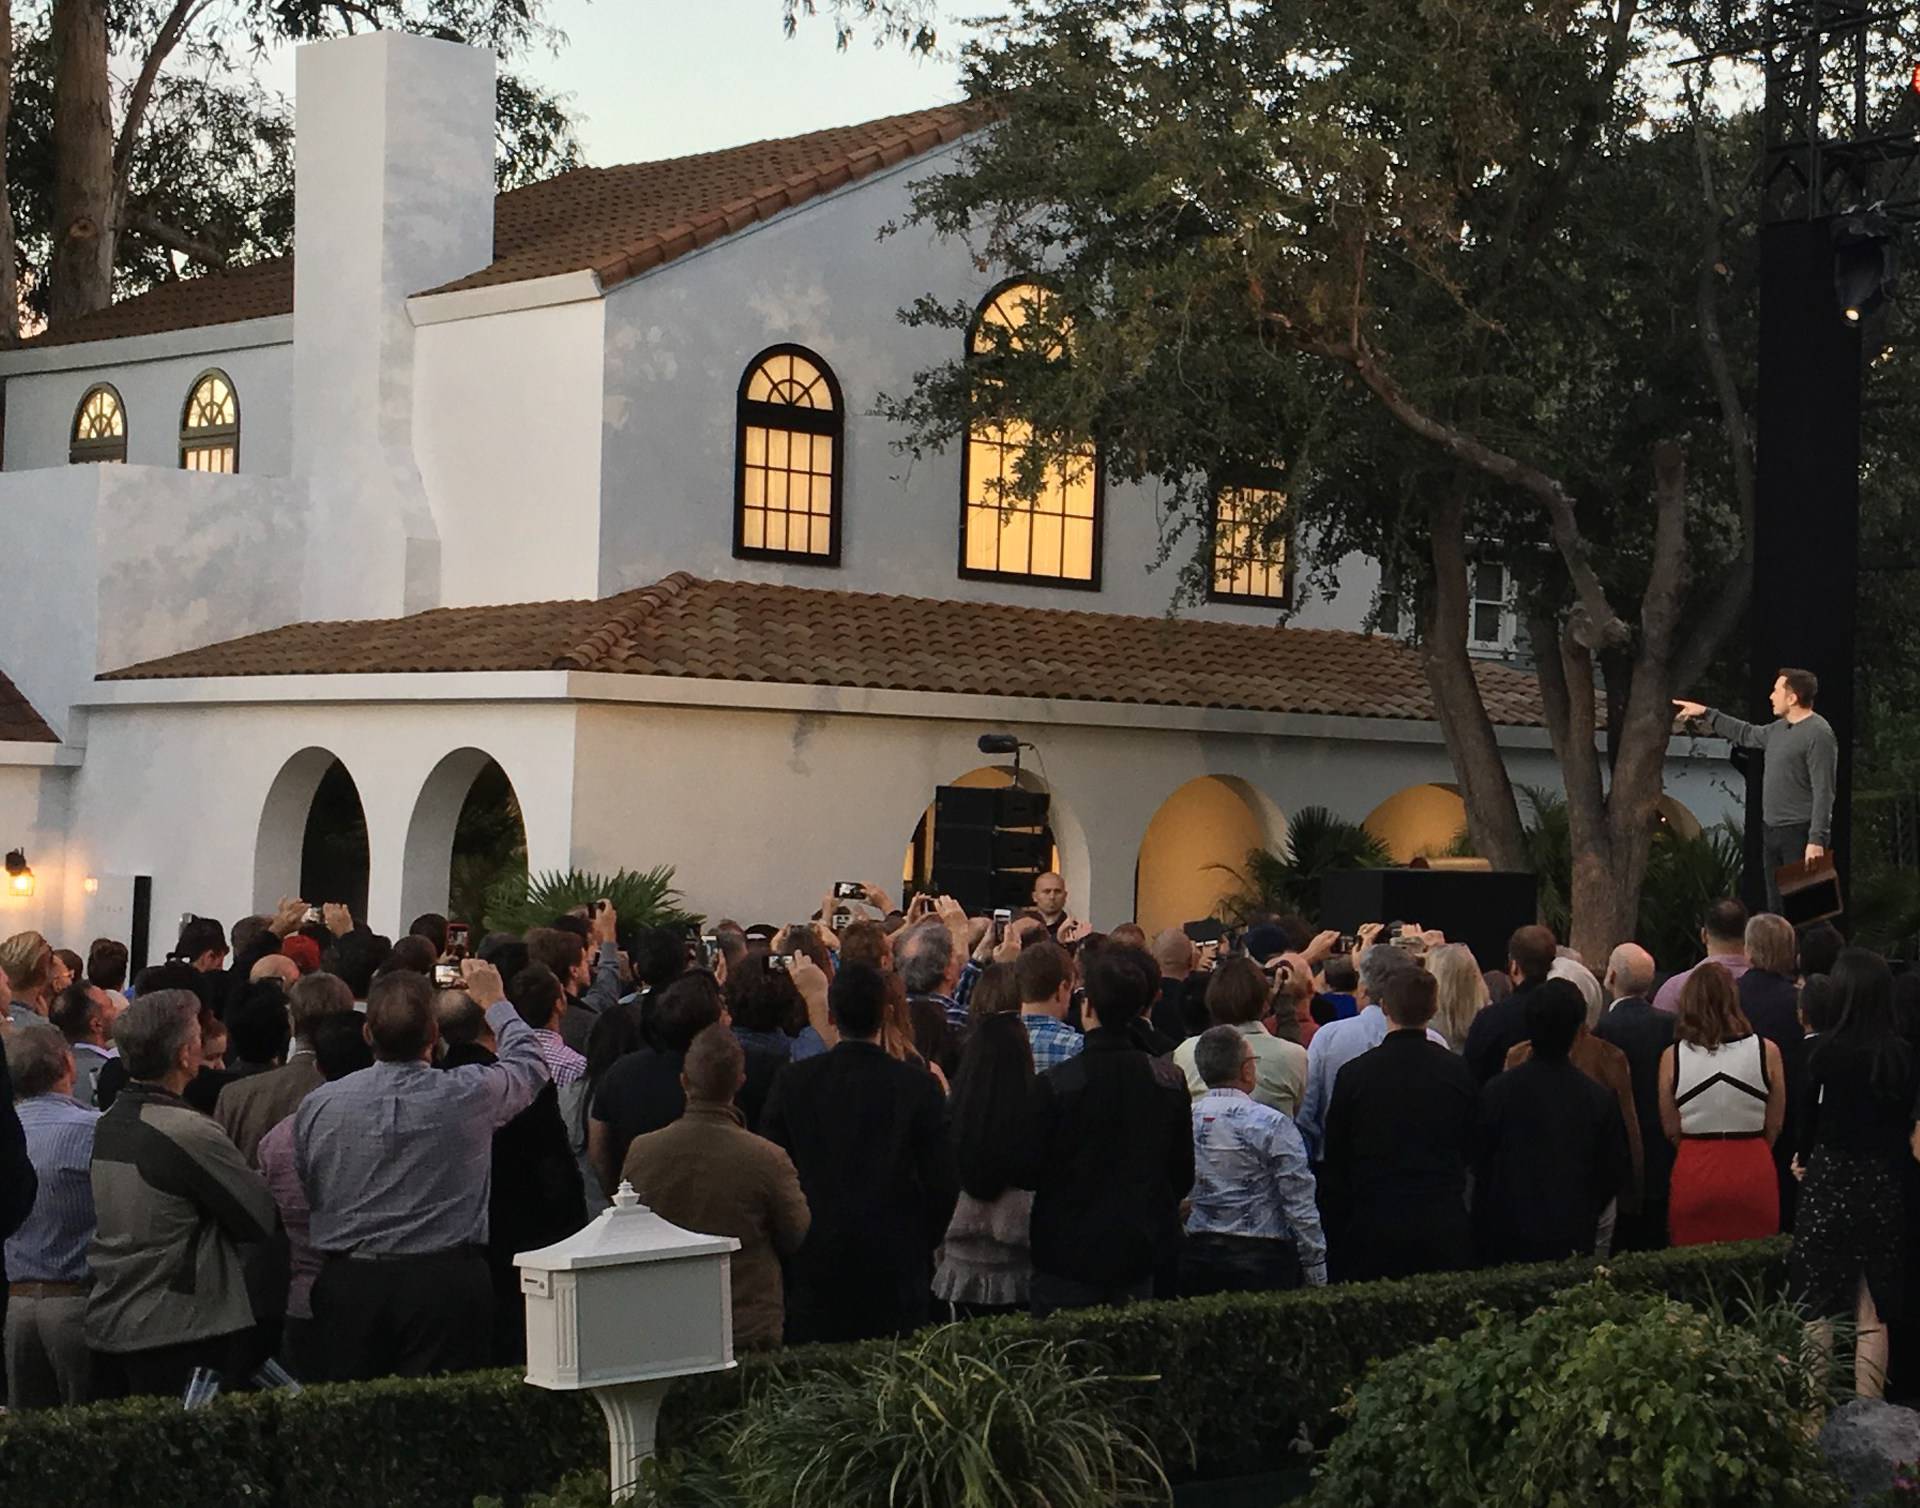 Tesla's electric car, Powerwall and solar roof are shown at an unveiling of new energy products aimed at illustrating the benefits of combining his electric car and battery maker with solar installer SolarCity Corp, in Los Angeles